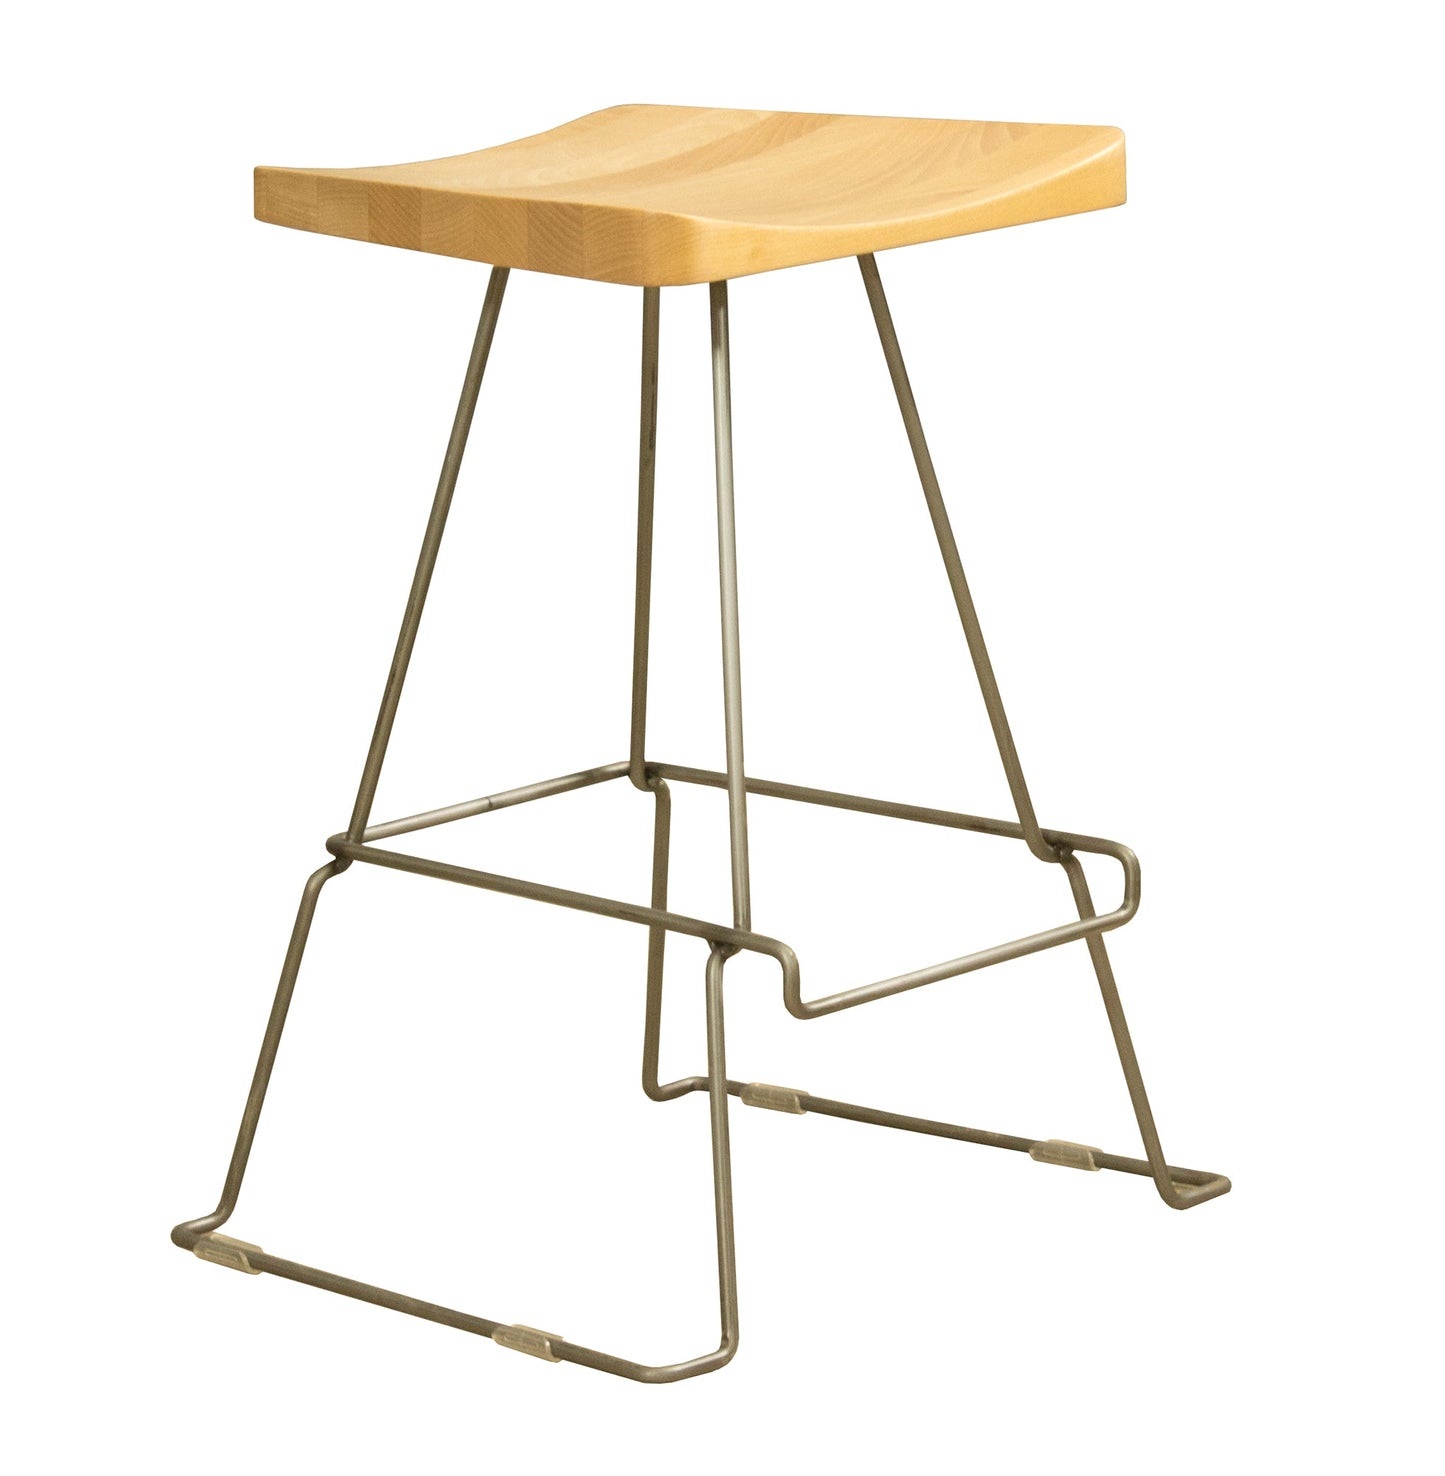 Model 115 Maple Seat Counter Stool